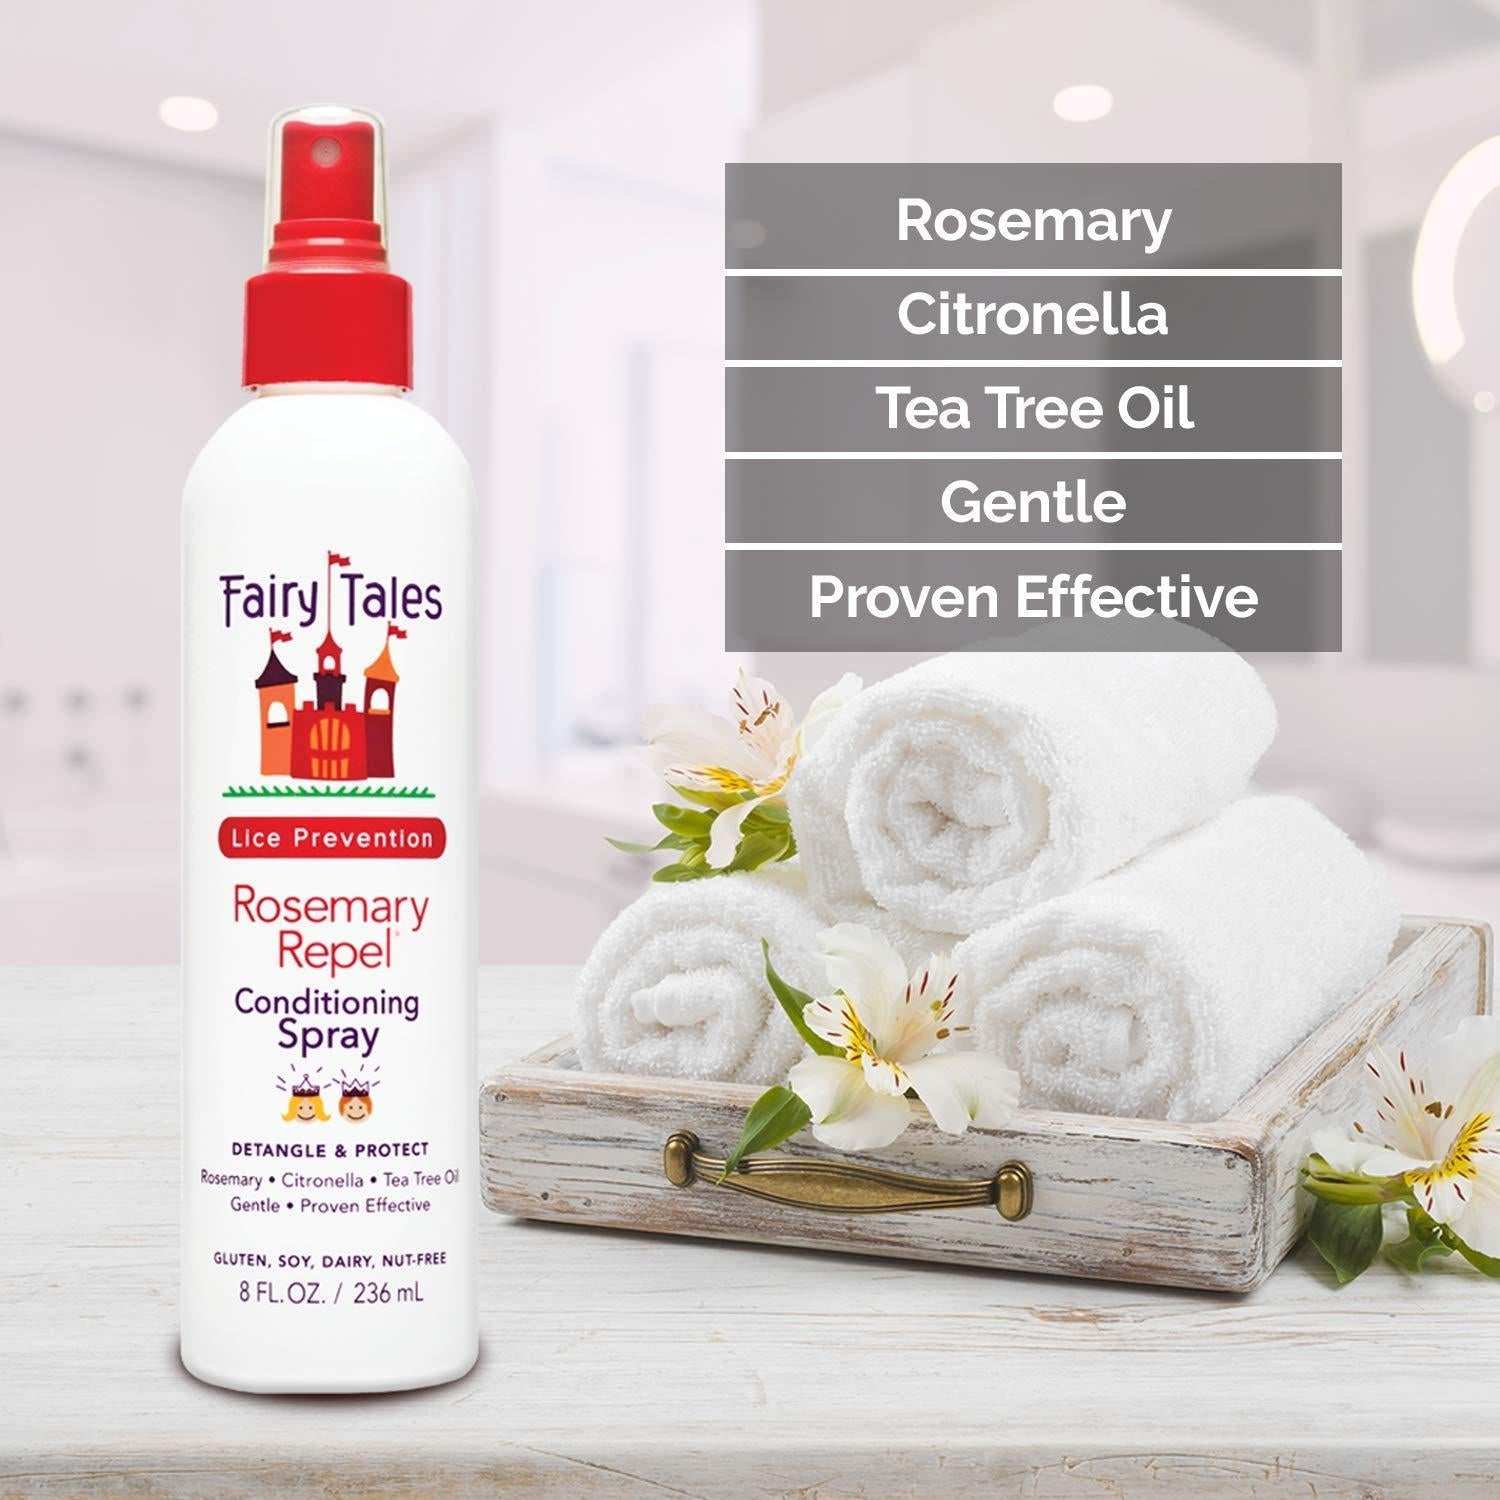 Load image into Gallery viewer, Fairy Tales Rosemary Repel Conditioning Spray
